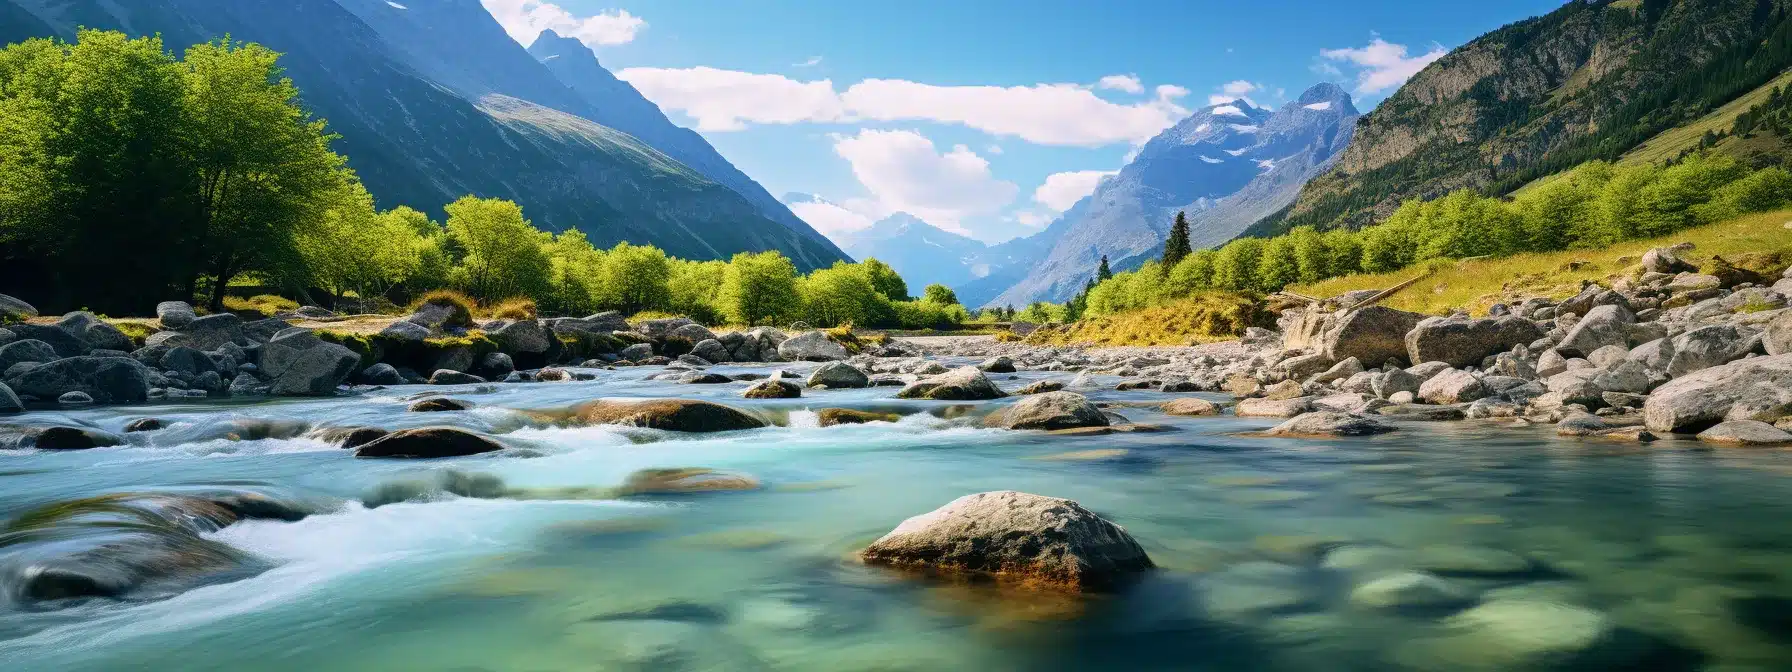 A Clear, Flowing River Running Through A Picturesque Mountainscape.